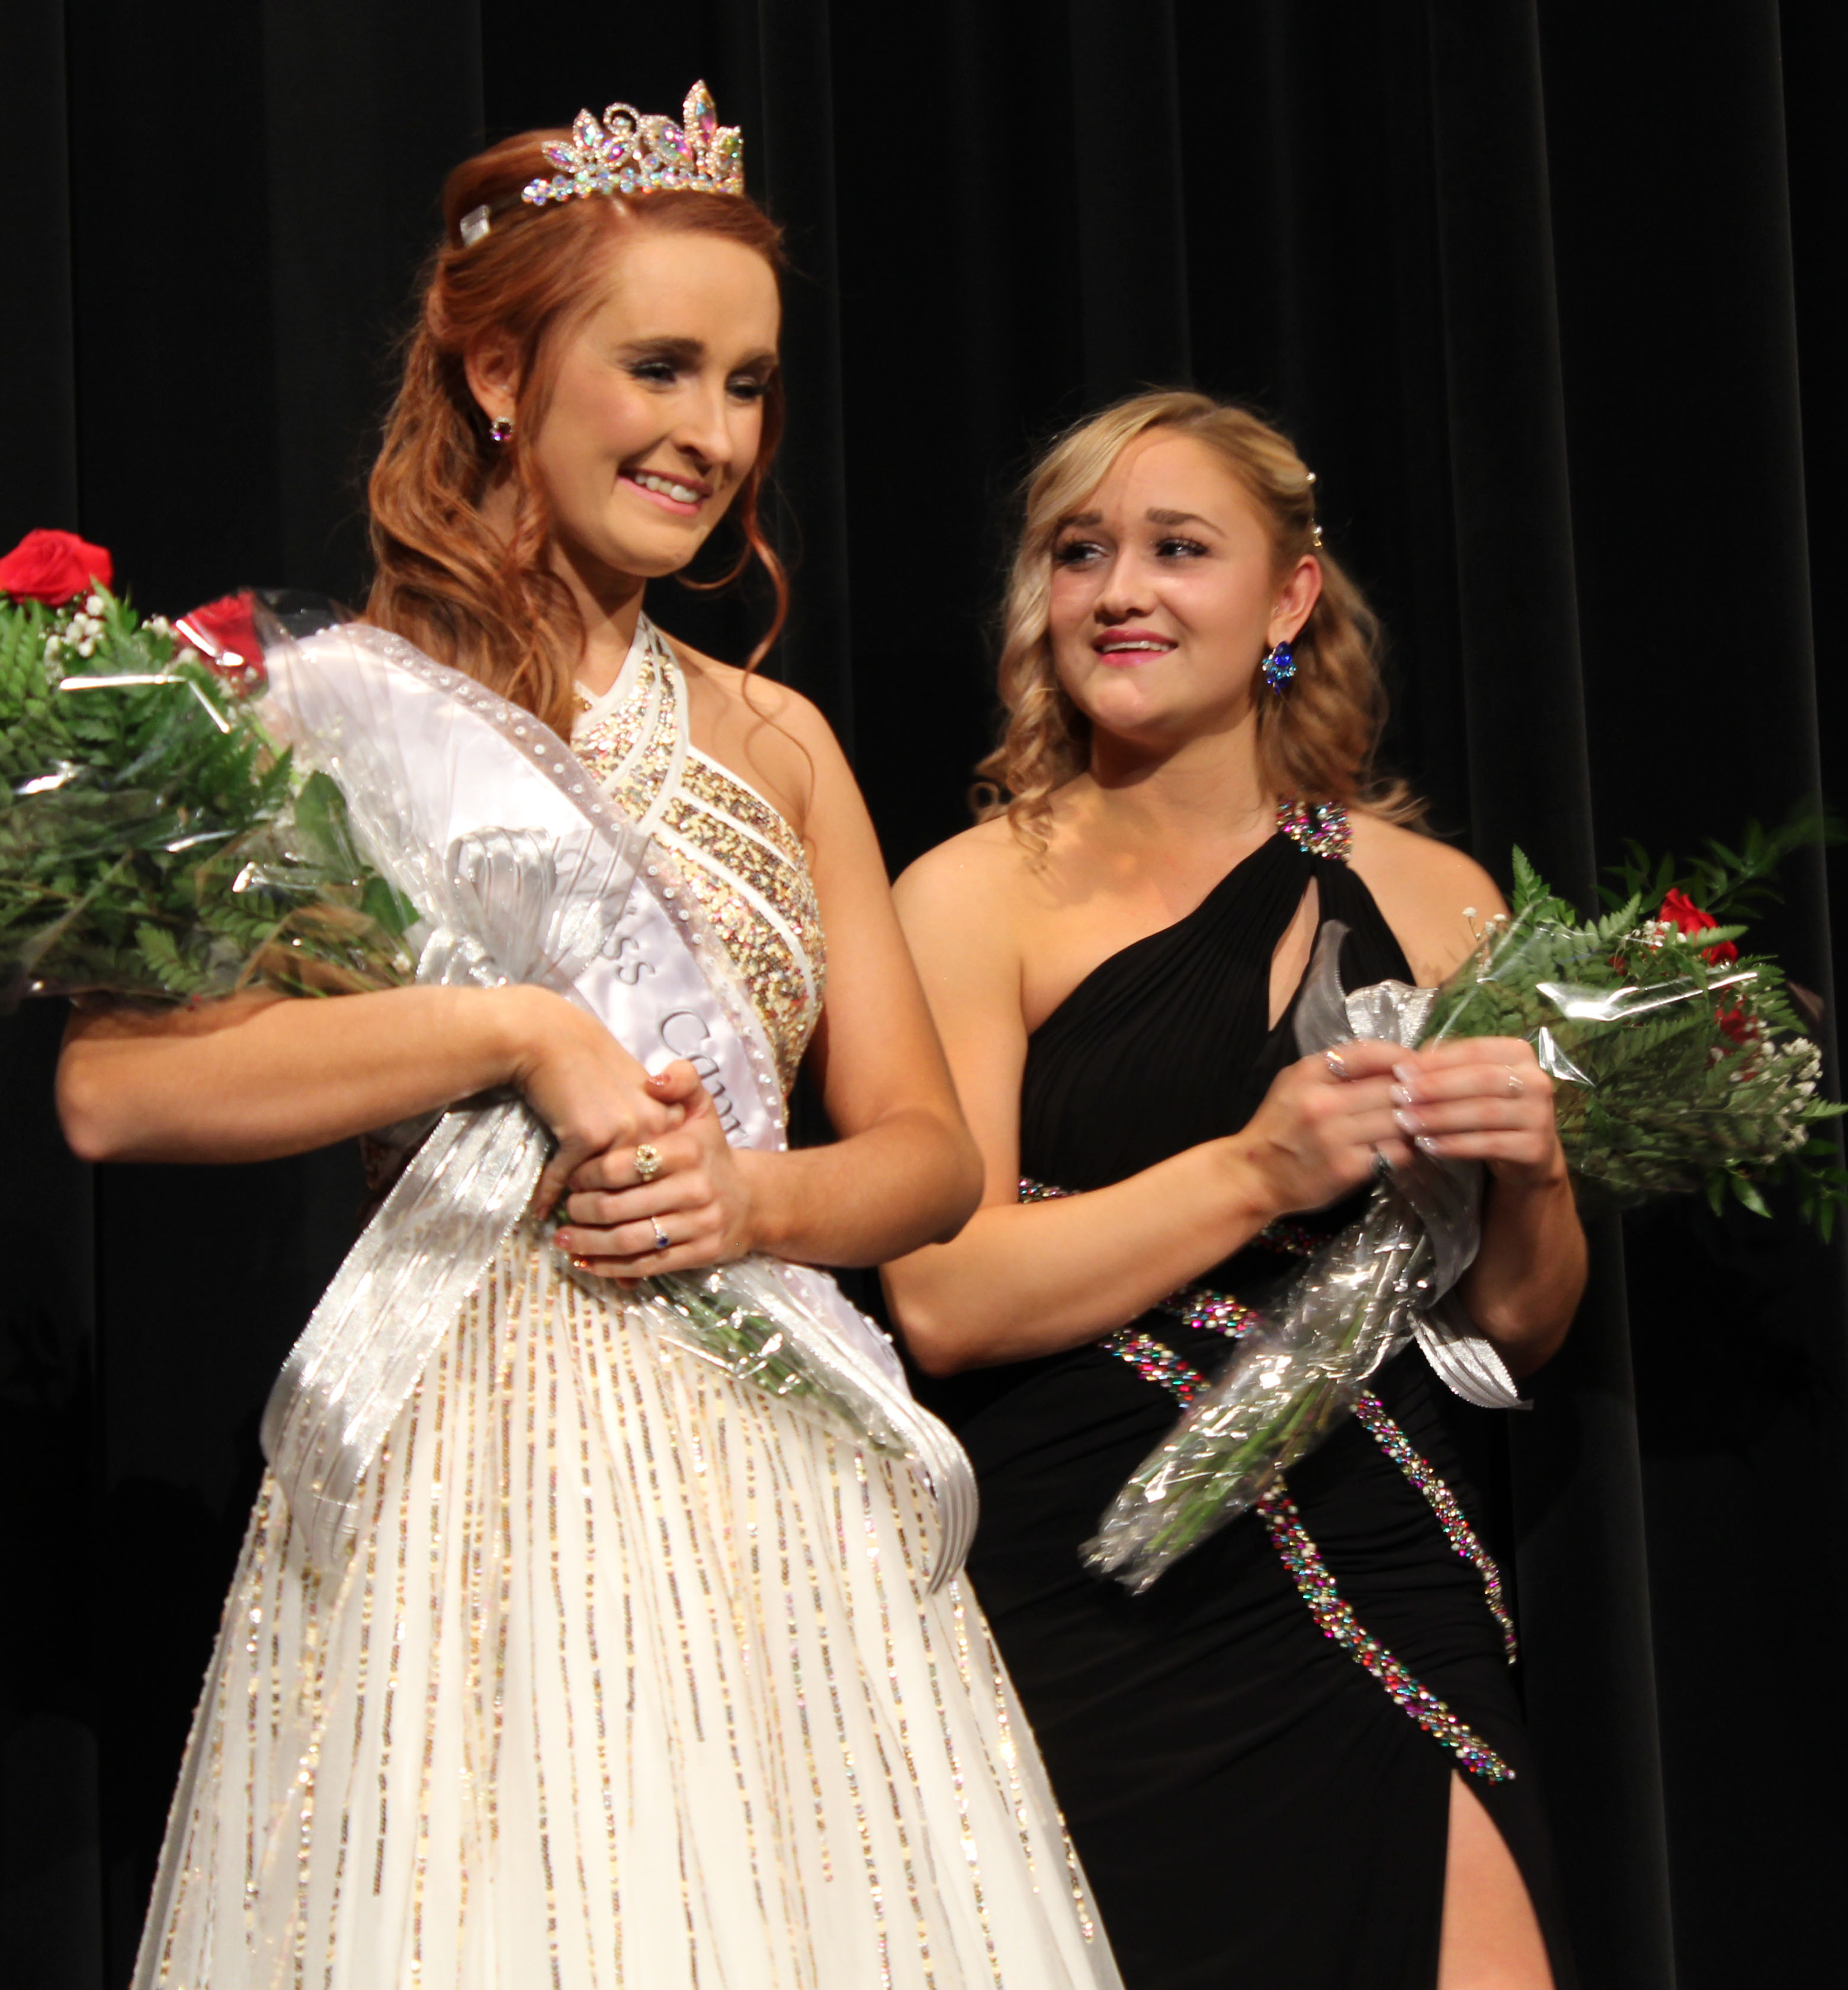 Gililland crowned Miss Caprock at annual scholarship pageant